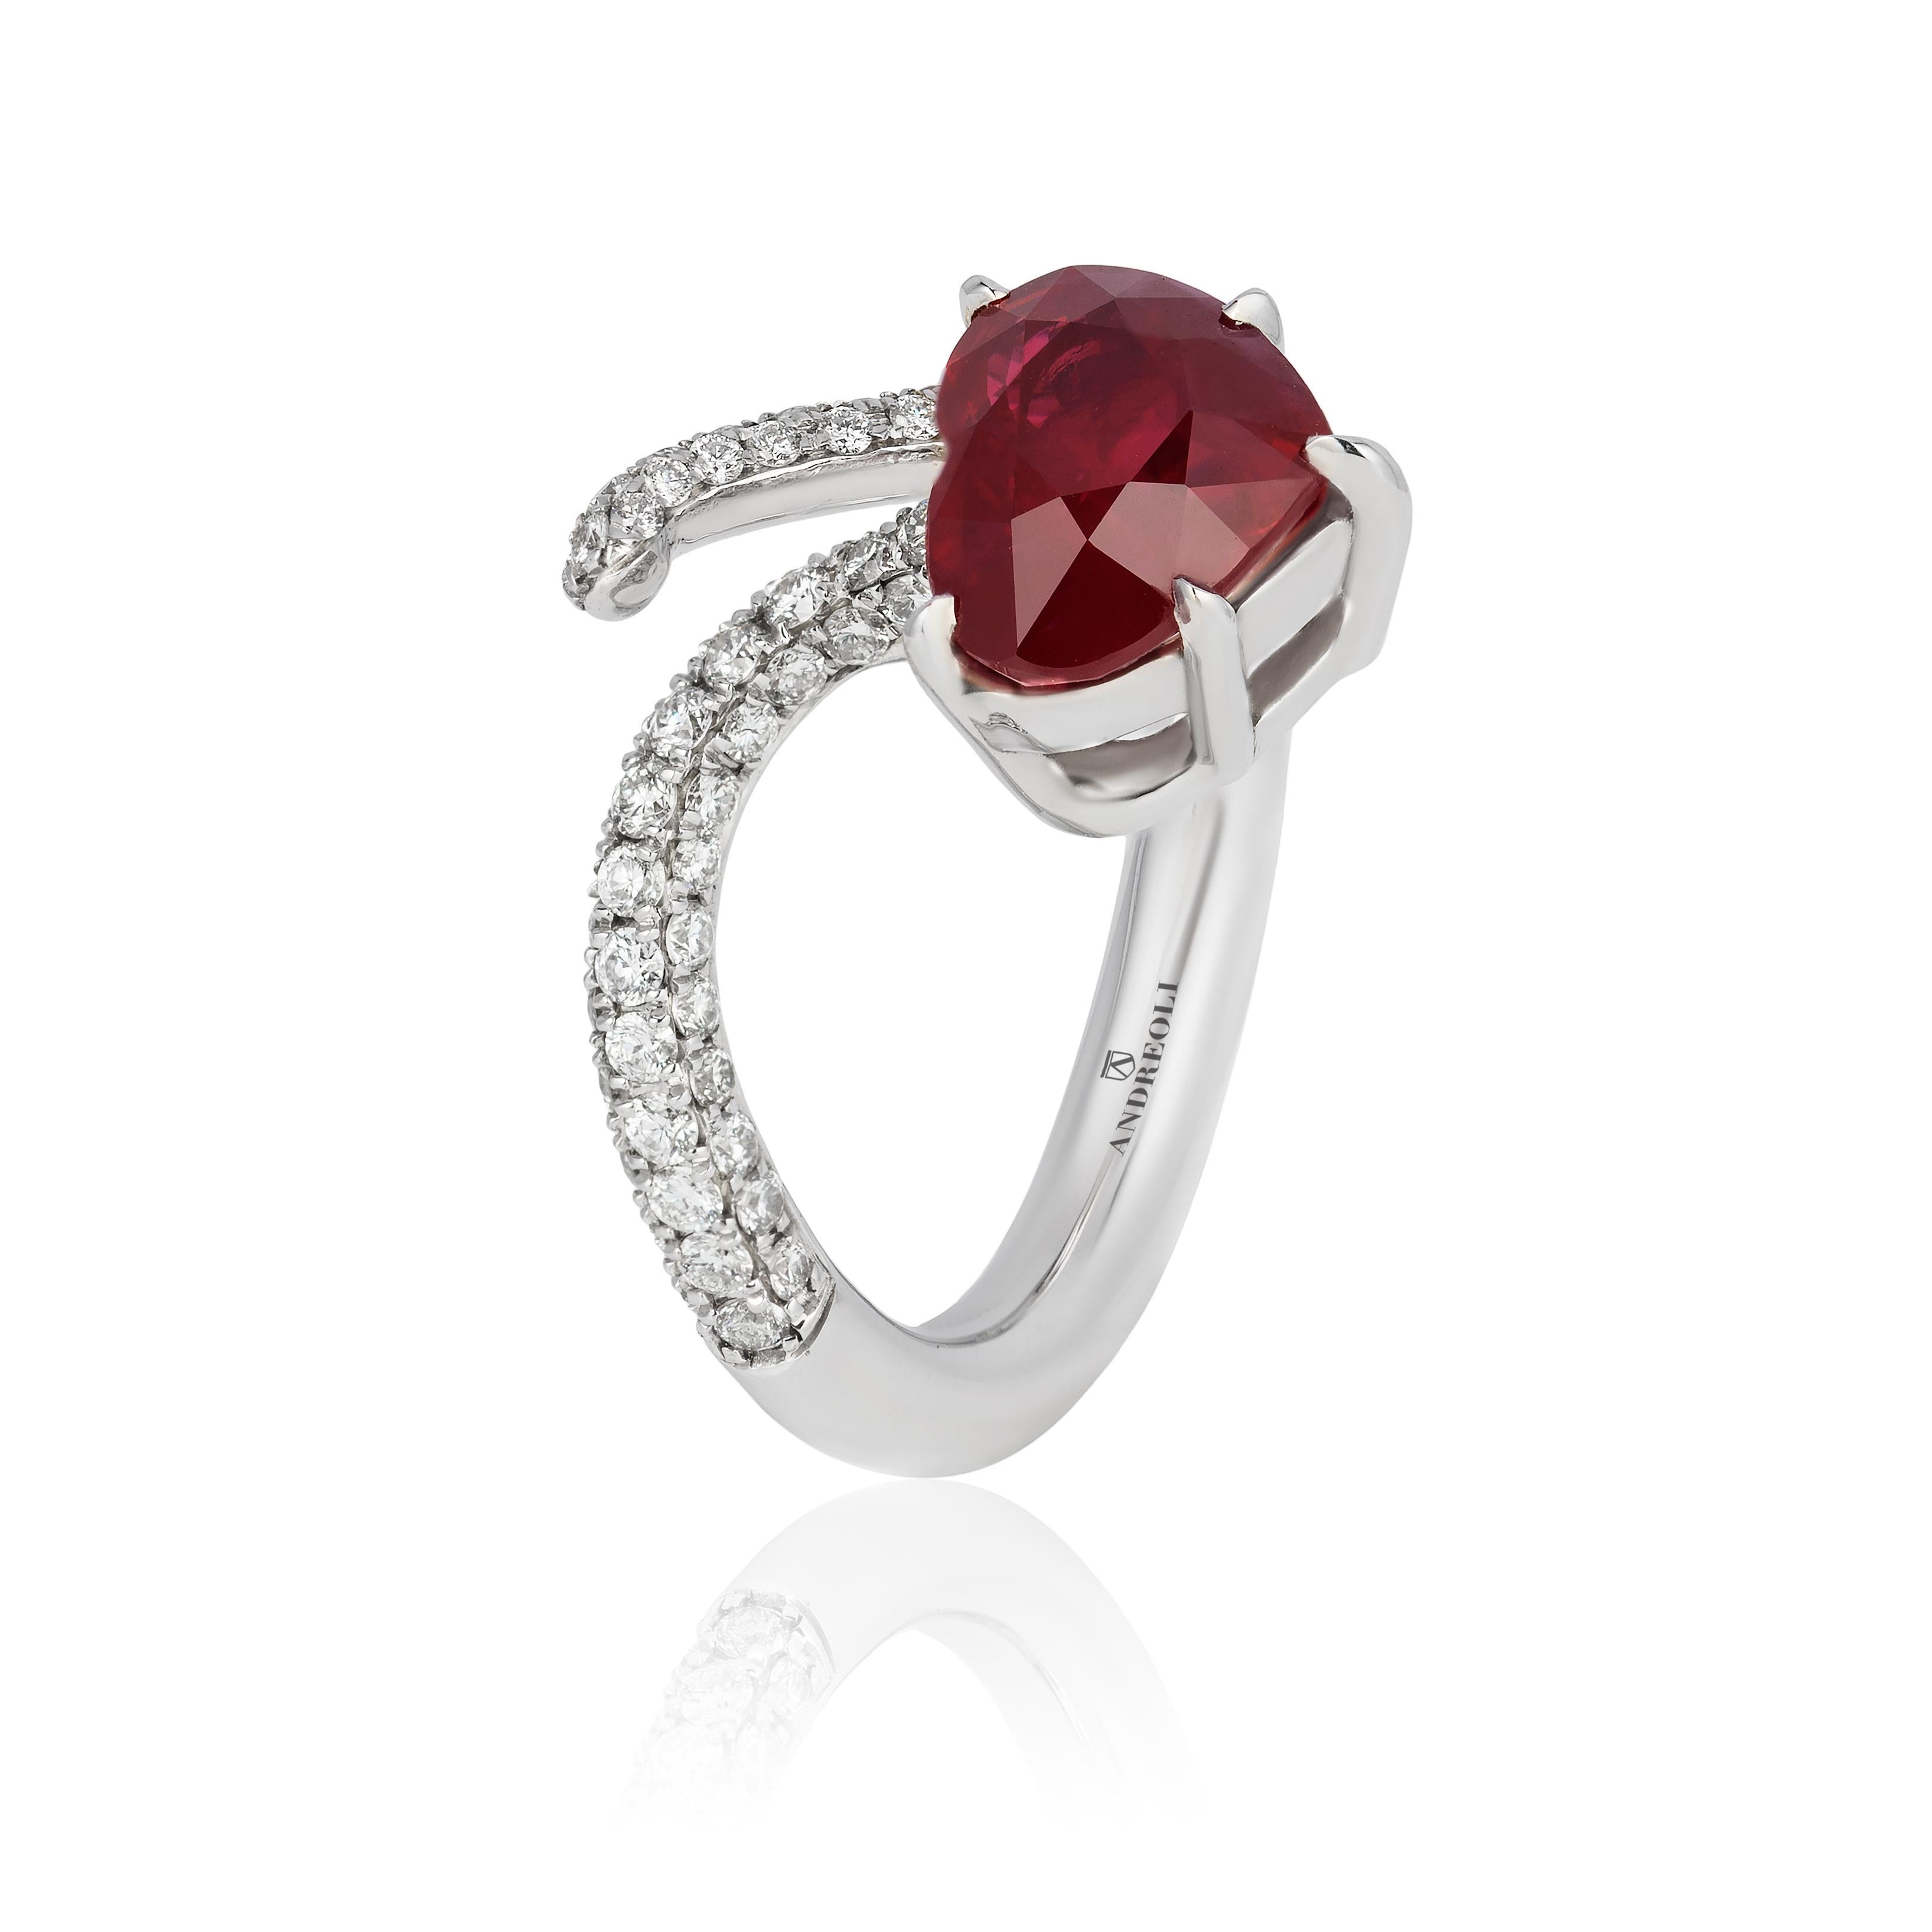 Andreoli Certified 4.02 Carat Burma Ruby Heart Shape Ring Diamond 18 Karat Gold

This ring features:
-  0.85 carats of F-G-H Color, VS-SI Clarity Diamonds
- 4.02 carat Burma Ruby CDC Swiss Lab Report
- 10.73 grams 18 Karat White Gold

